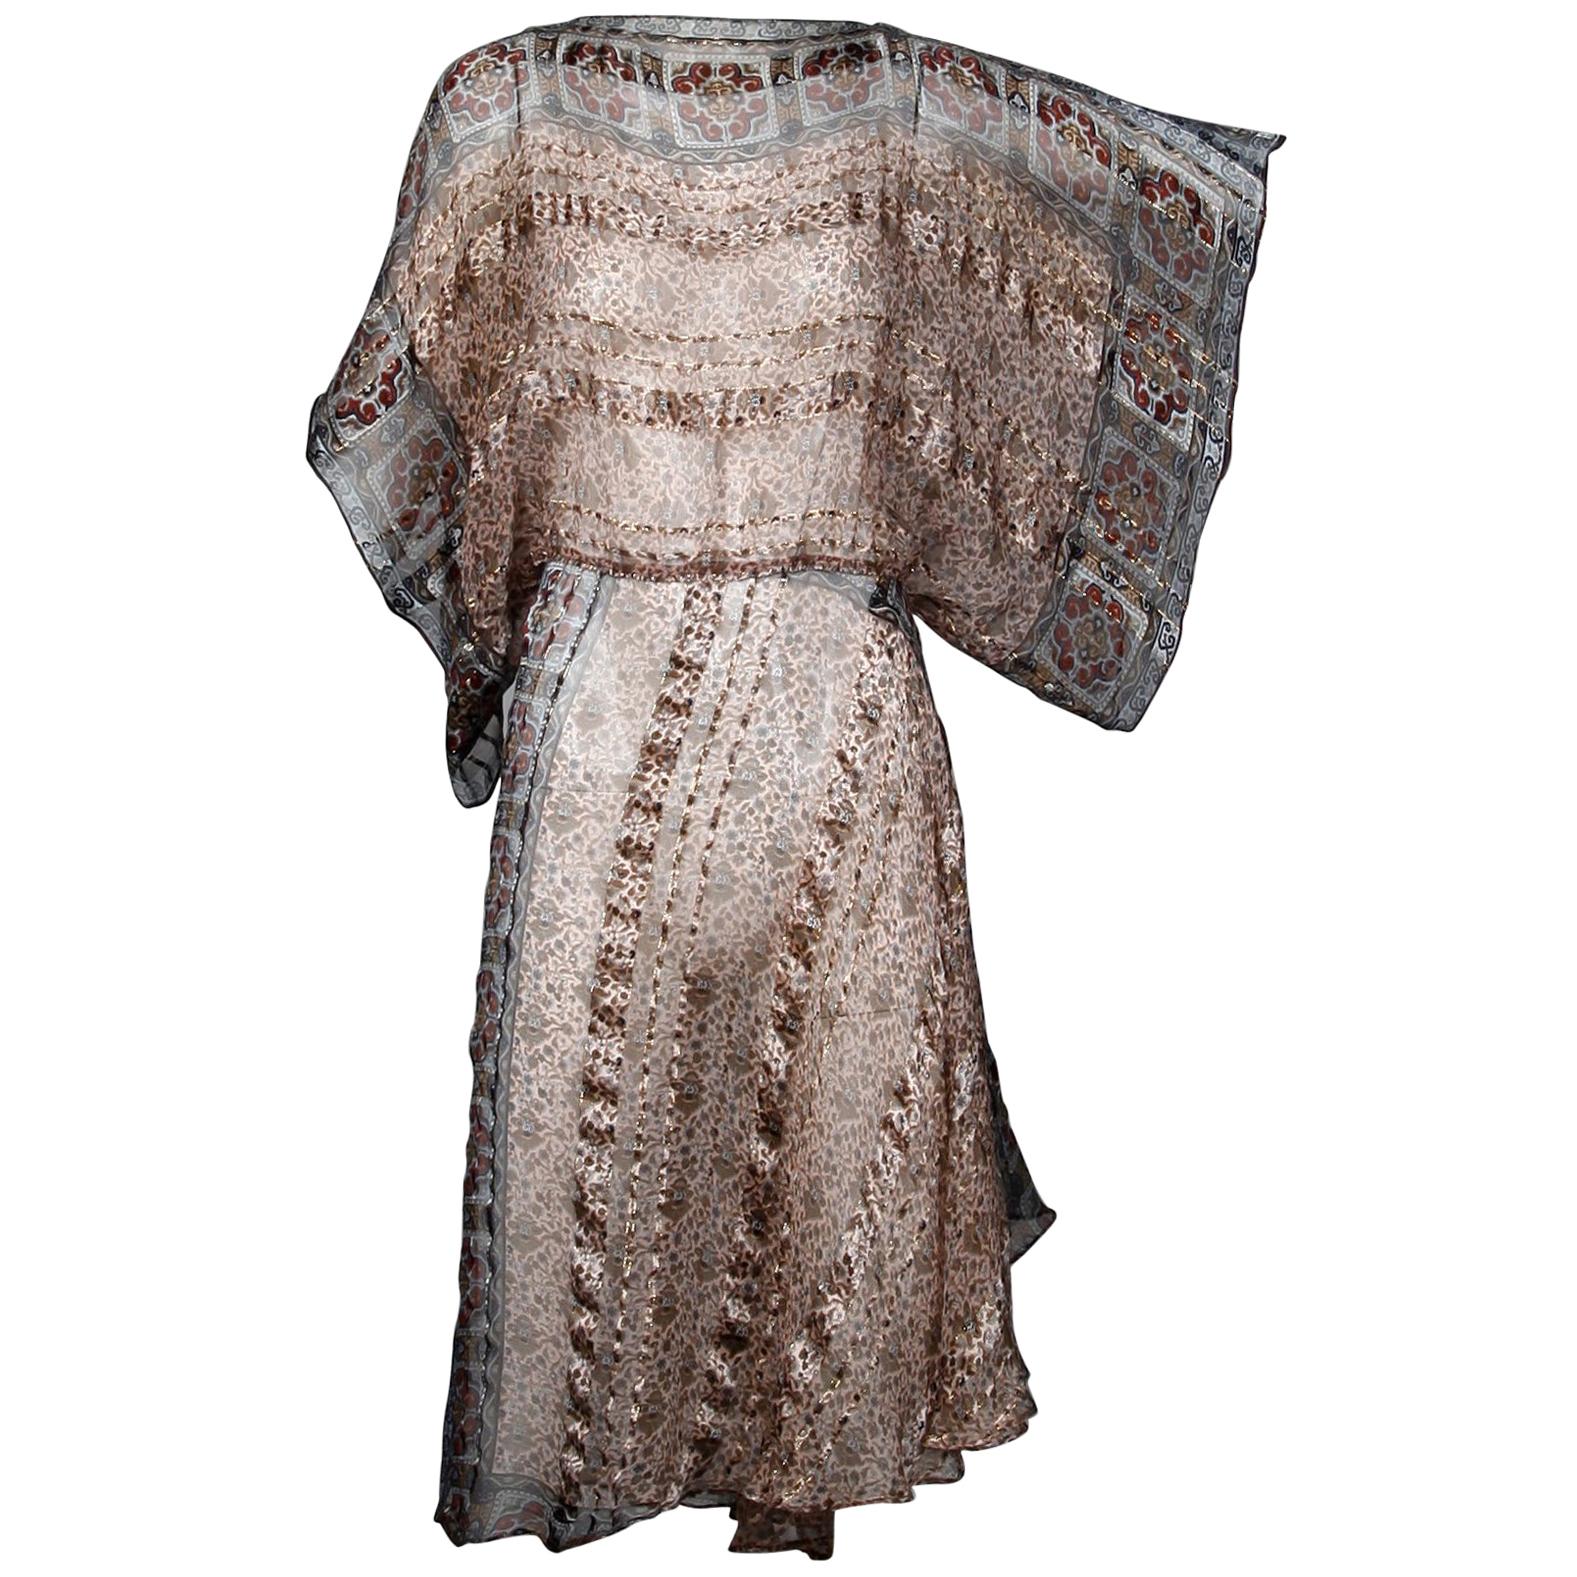 Gorgeous paper thin metallic printed silk dress with batwing sleeves by The Silk Farm. Unlined with rear button closure. 100% silk. The marked size is 6 and the dress fits like a size small-medium. The bust size is free, waist 32